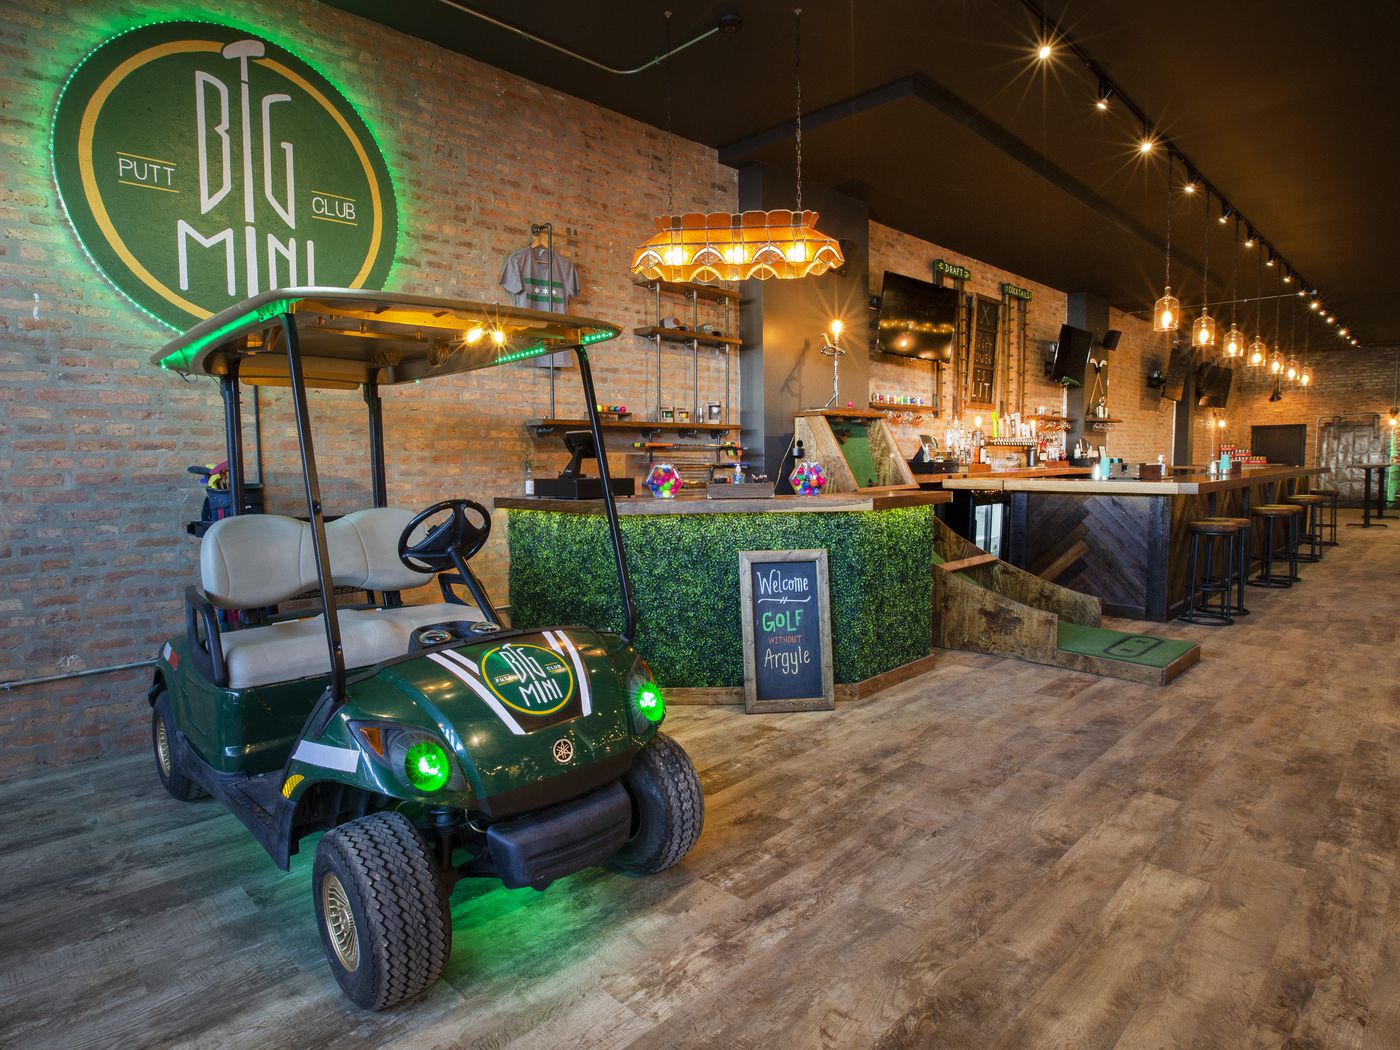 Big Mini Putt Club Will Open a New Location in Lakeview - Eater Chicago